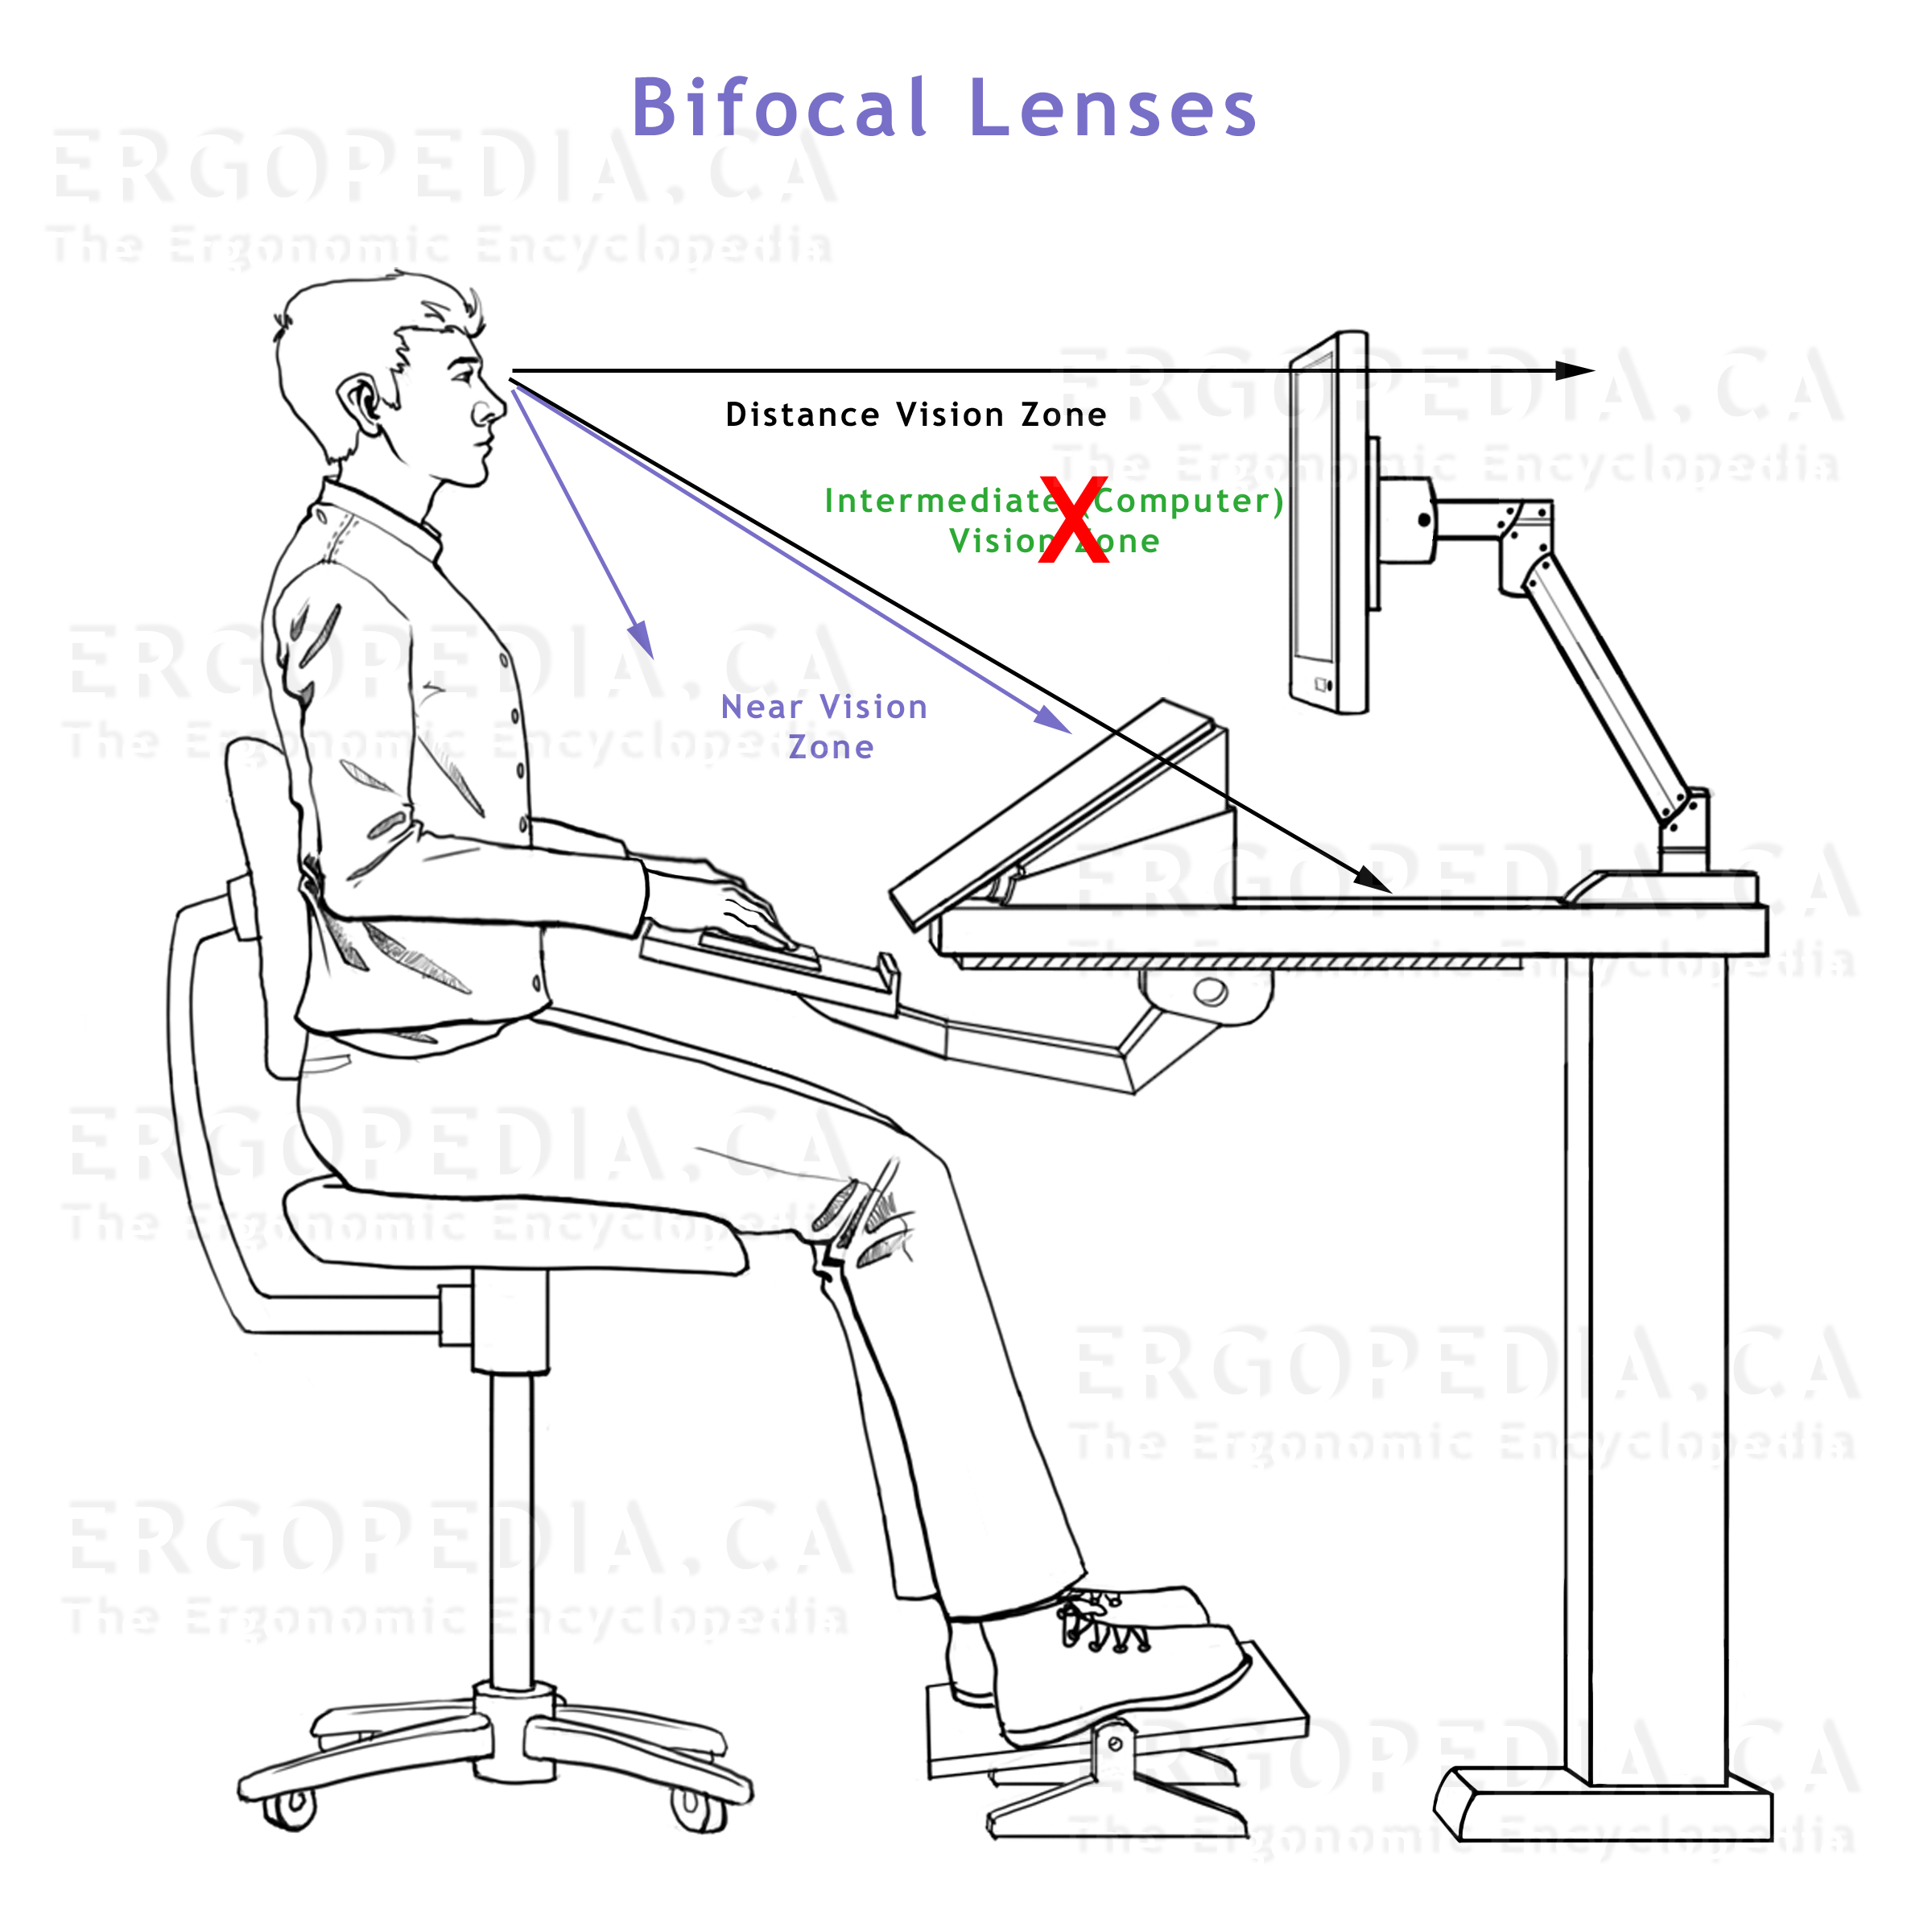 Graphic Showing Factors to be Considered when Working
            with BiFocal Lenses